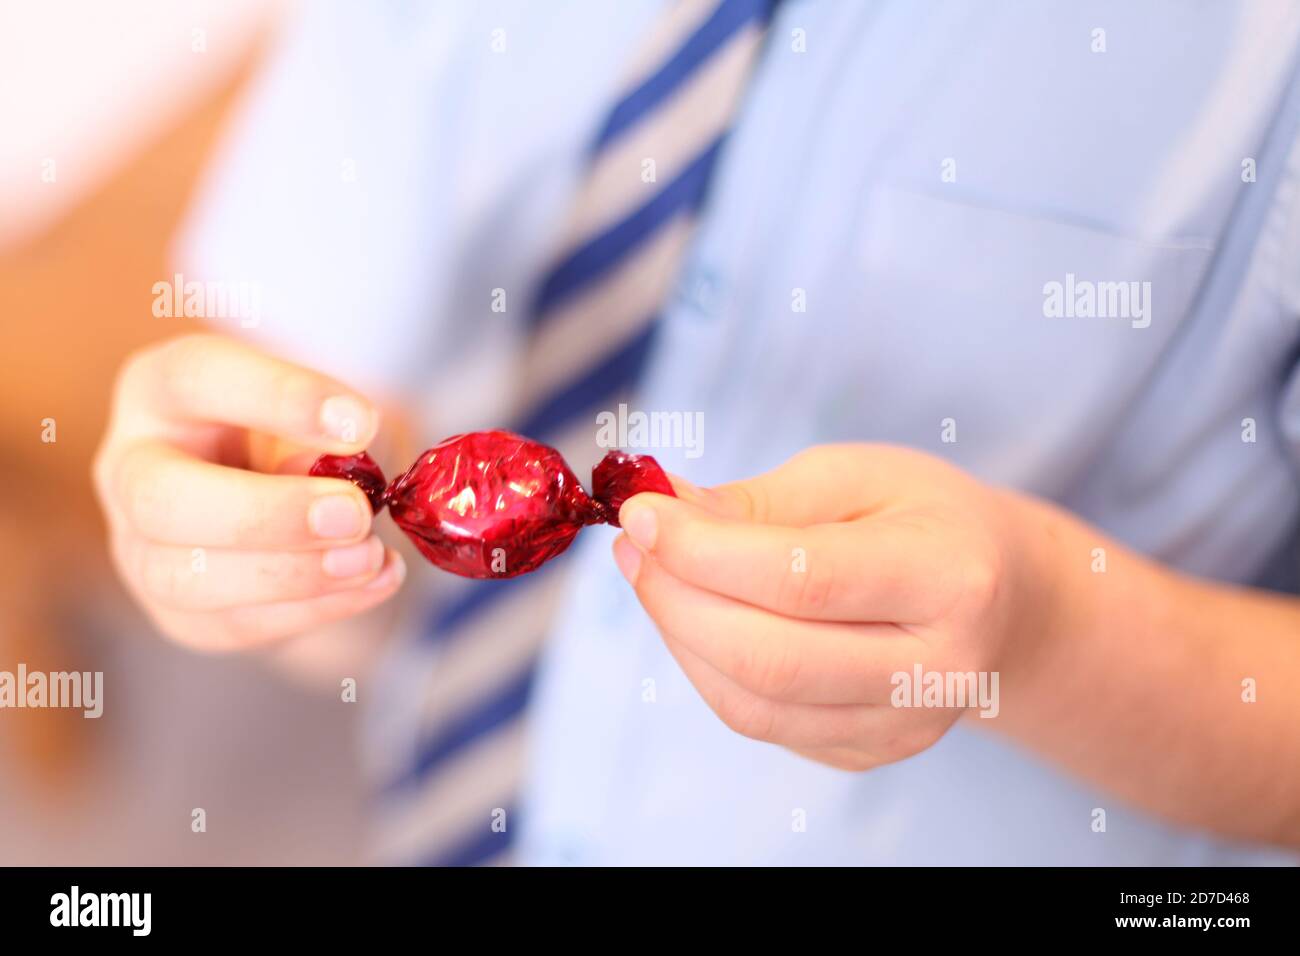 Child unwrapping Quality Street Strawberry Delight chocolate sweet wrapped in wrapper, close up Stock Photo